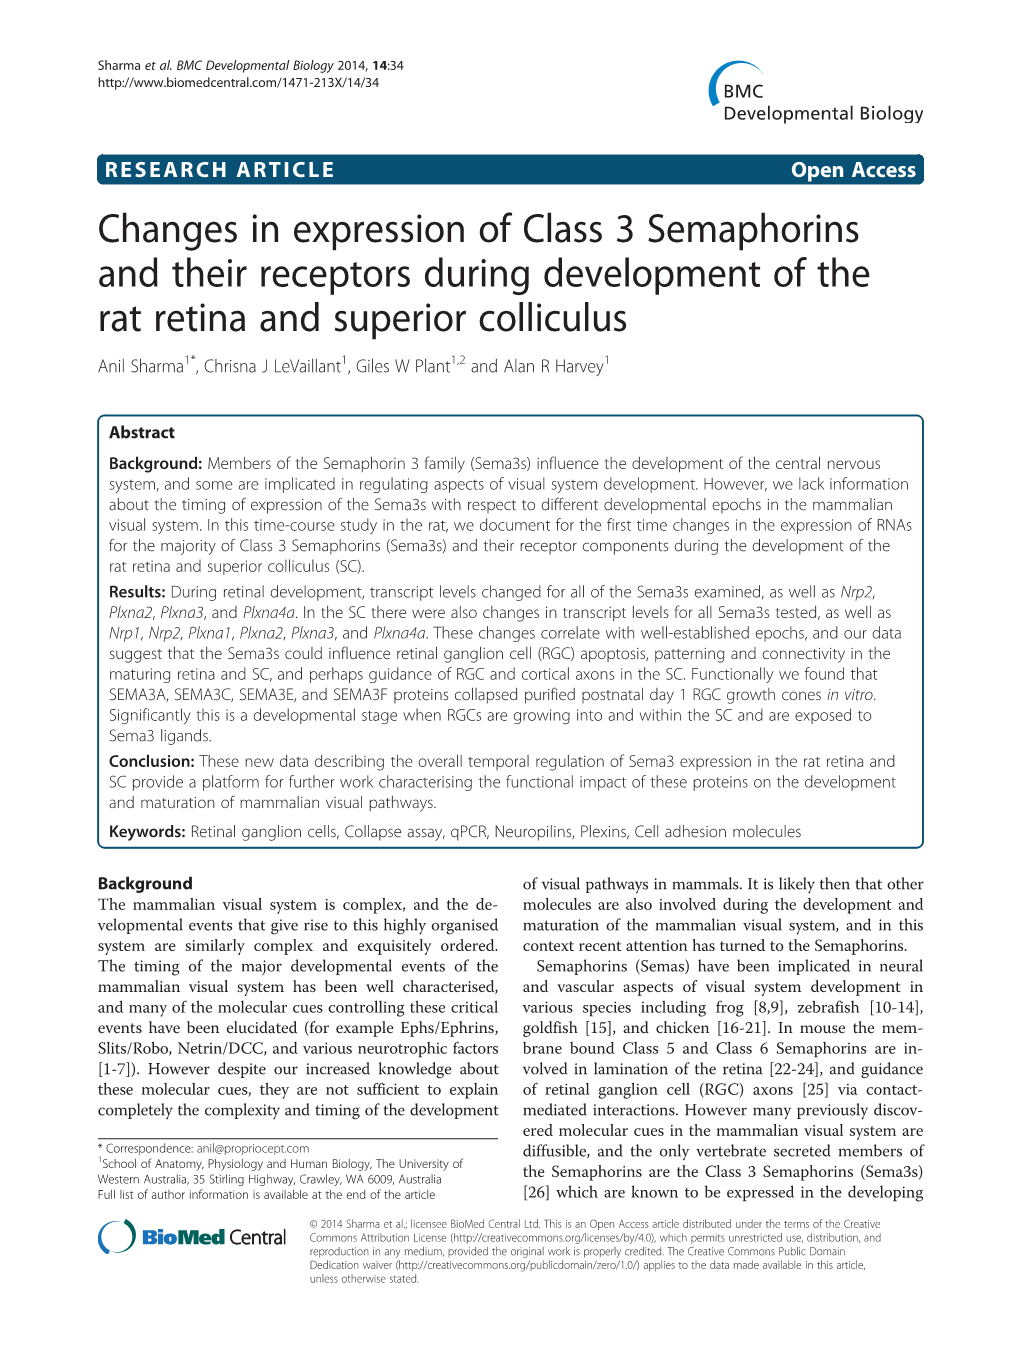 Changes in Expression of Class 3 Semaphorins and Their Receptors During Development of the Rat Retina and Superior Colliculus